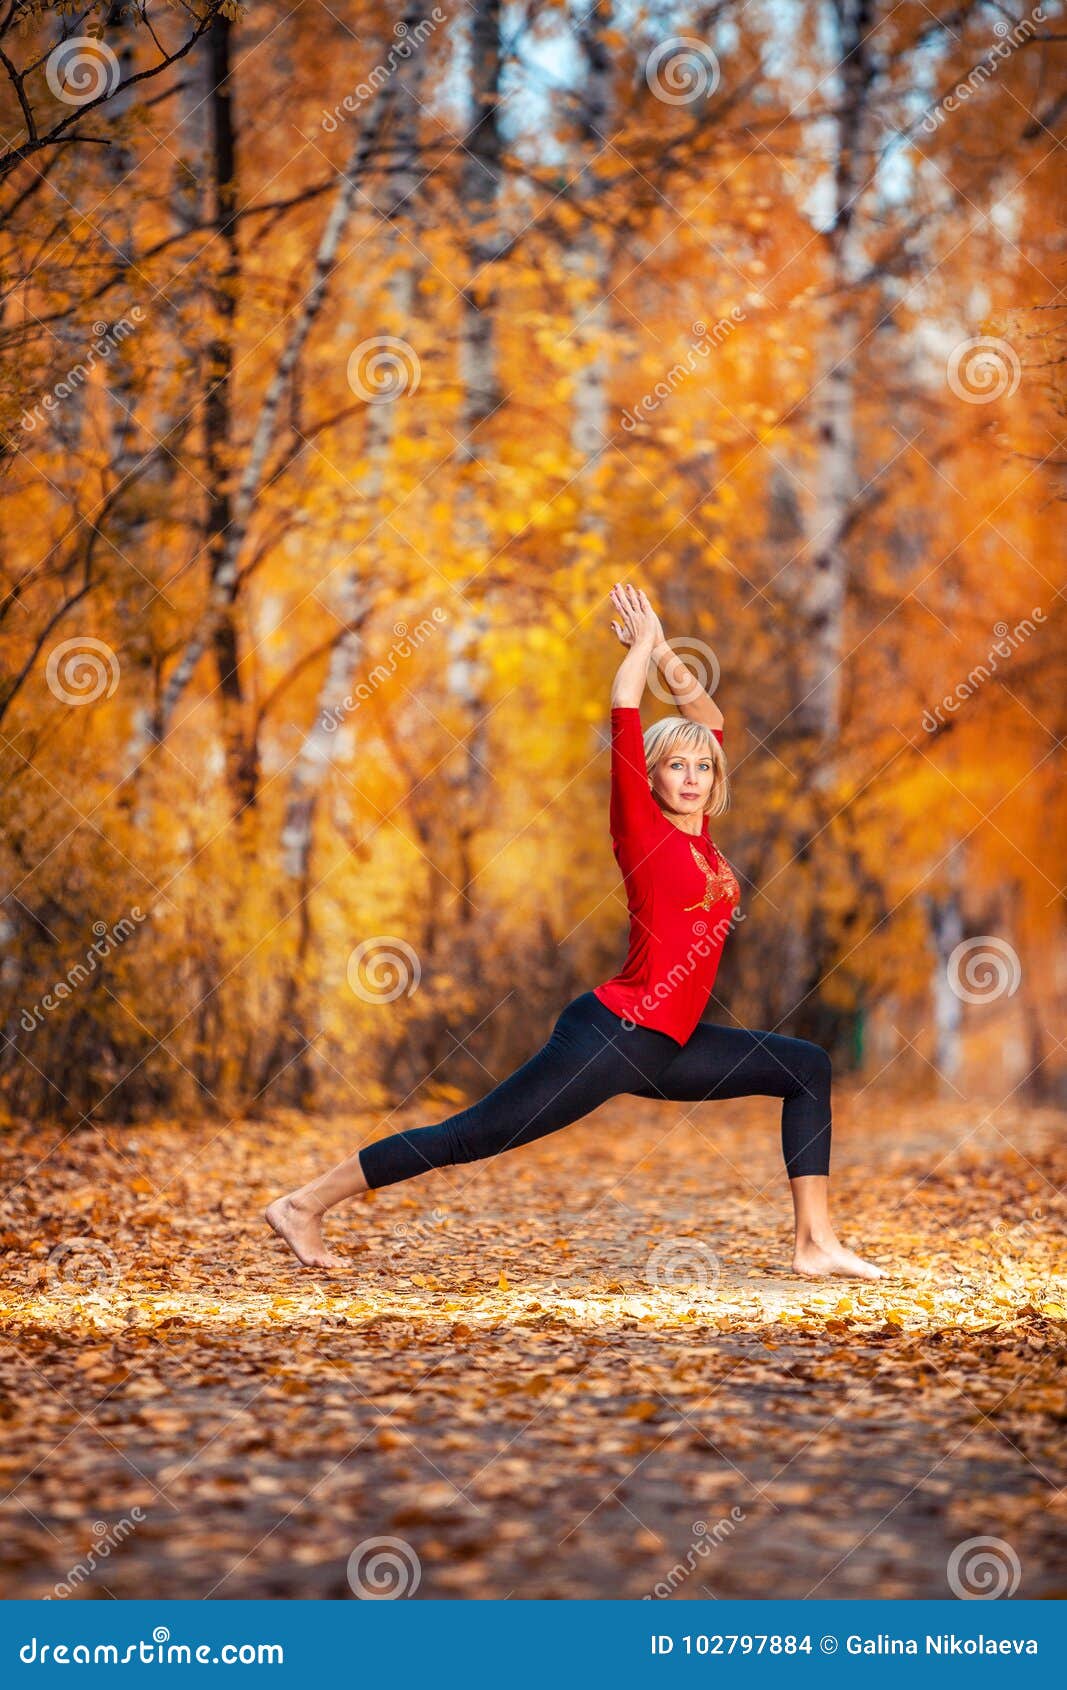 Beautiful Woman Doing Yoga Outdoors in Autumn Stock Photo - Image of ...